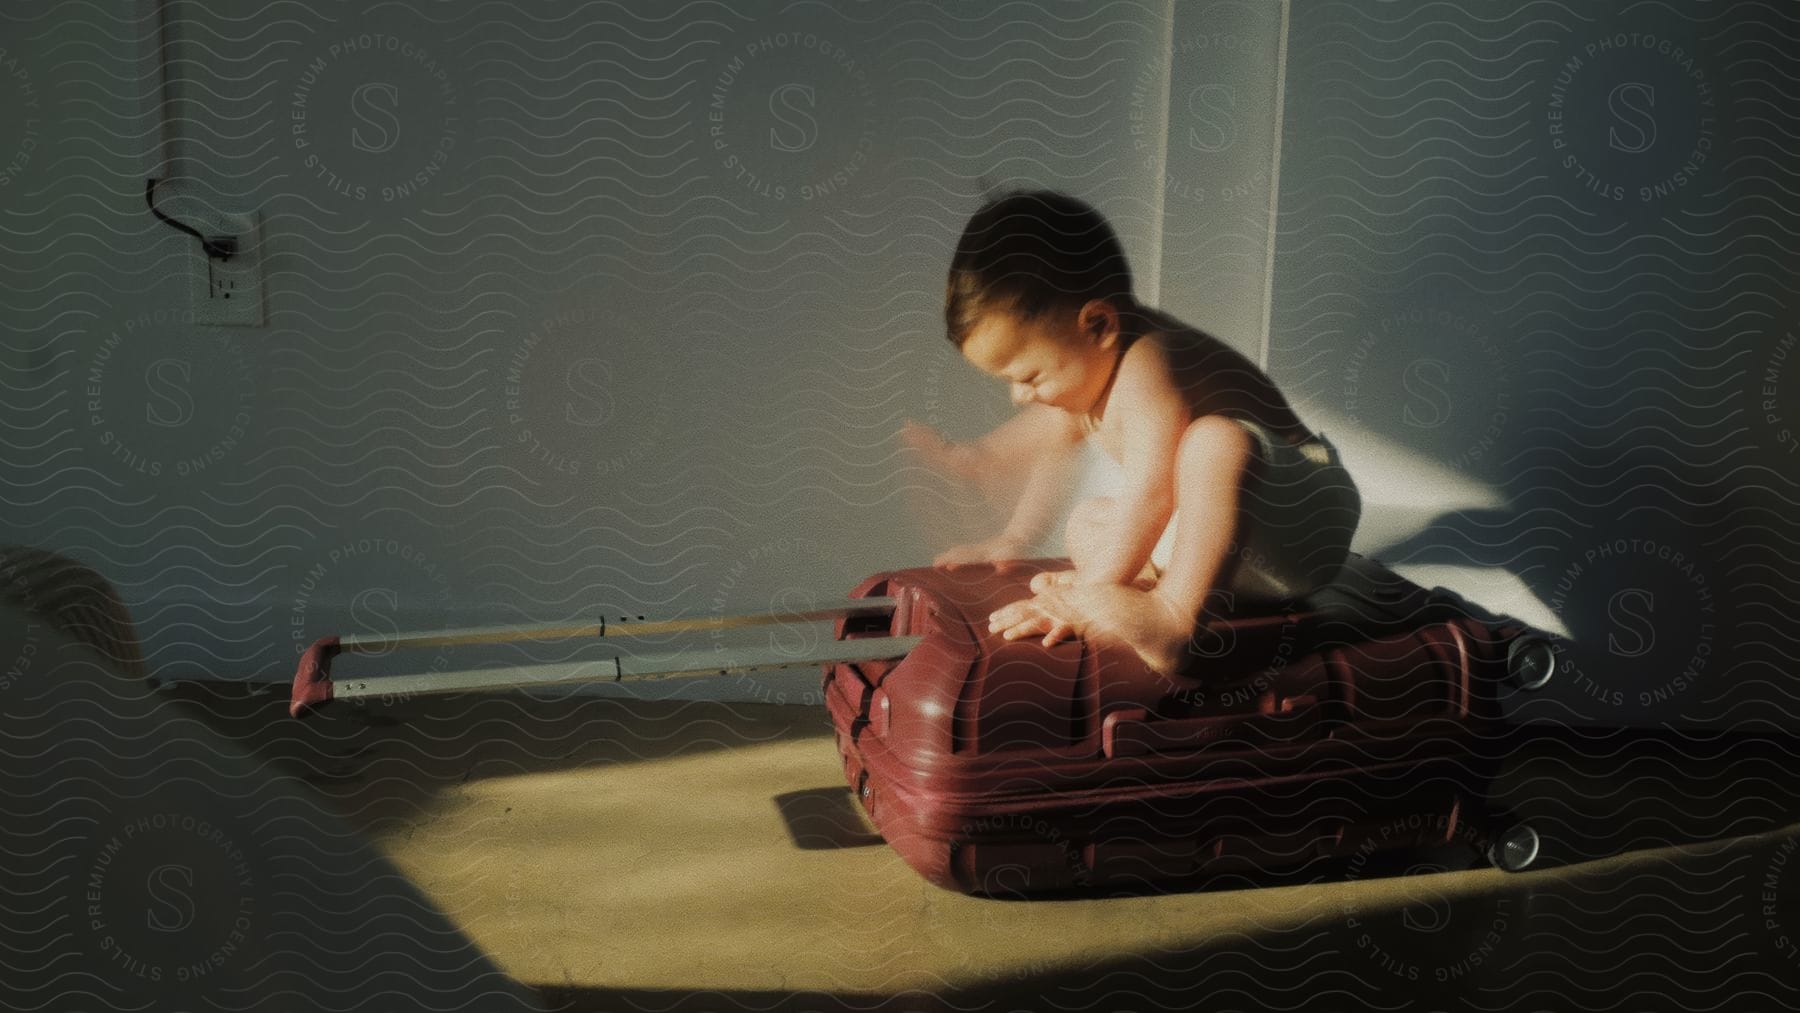 Baby on top of a red suitcase in a sun-drenched room.